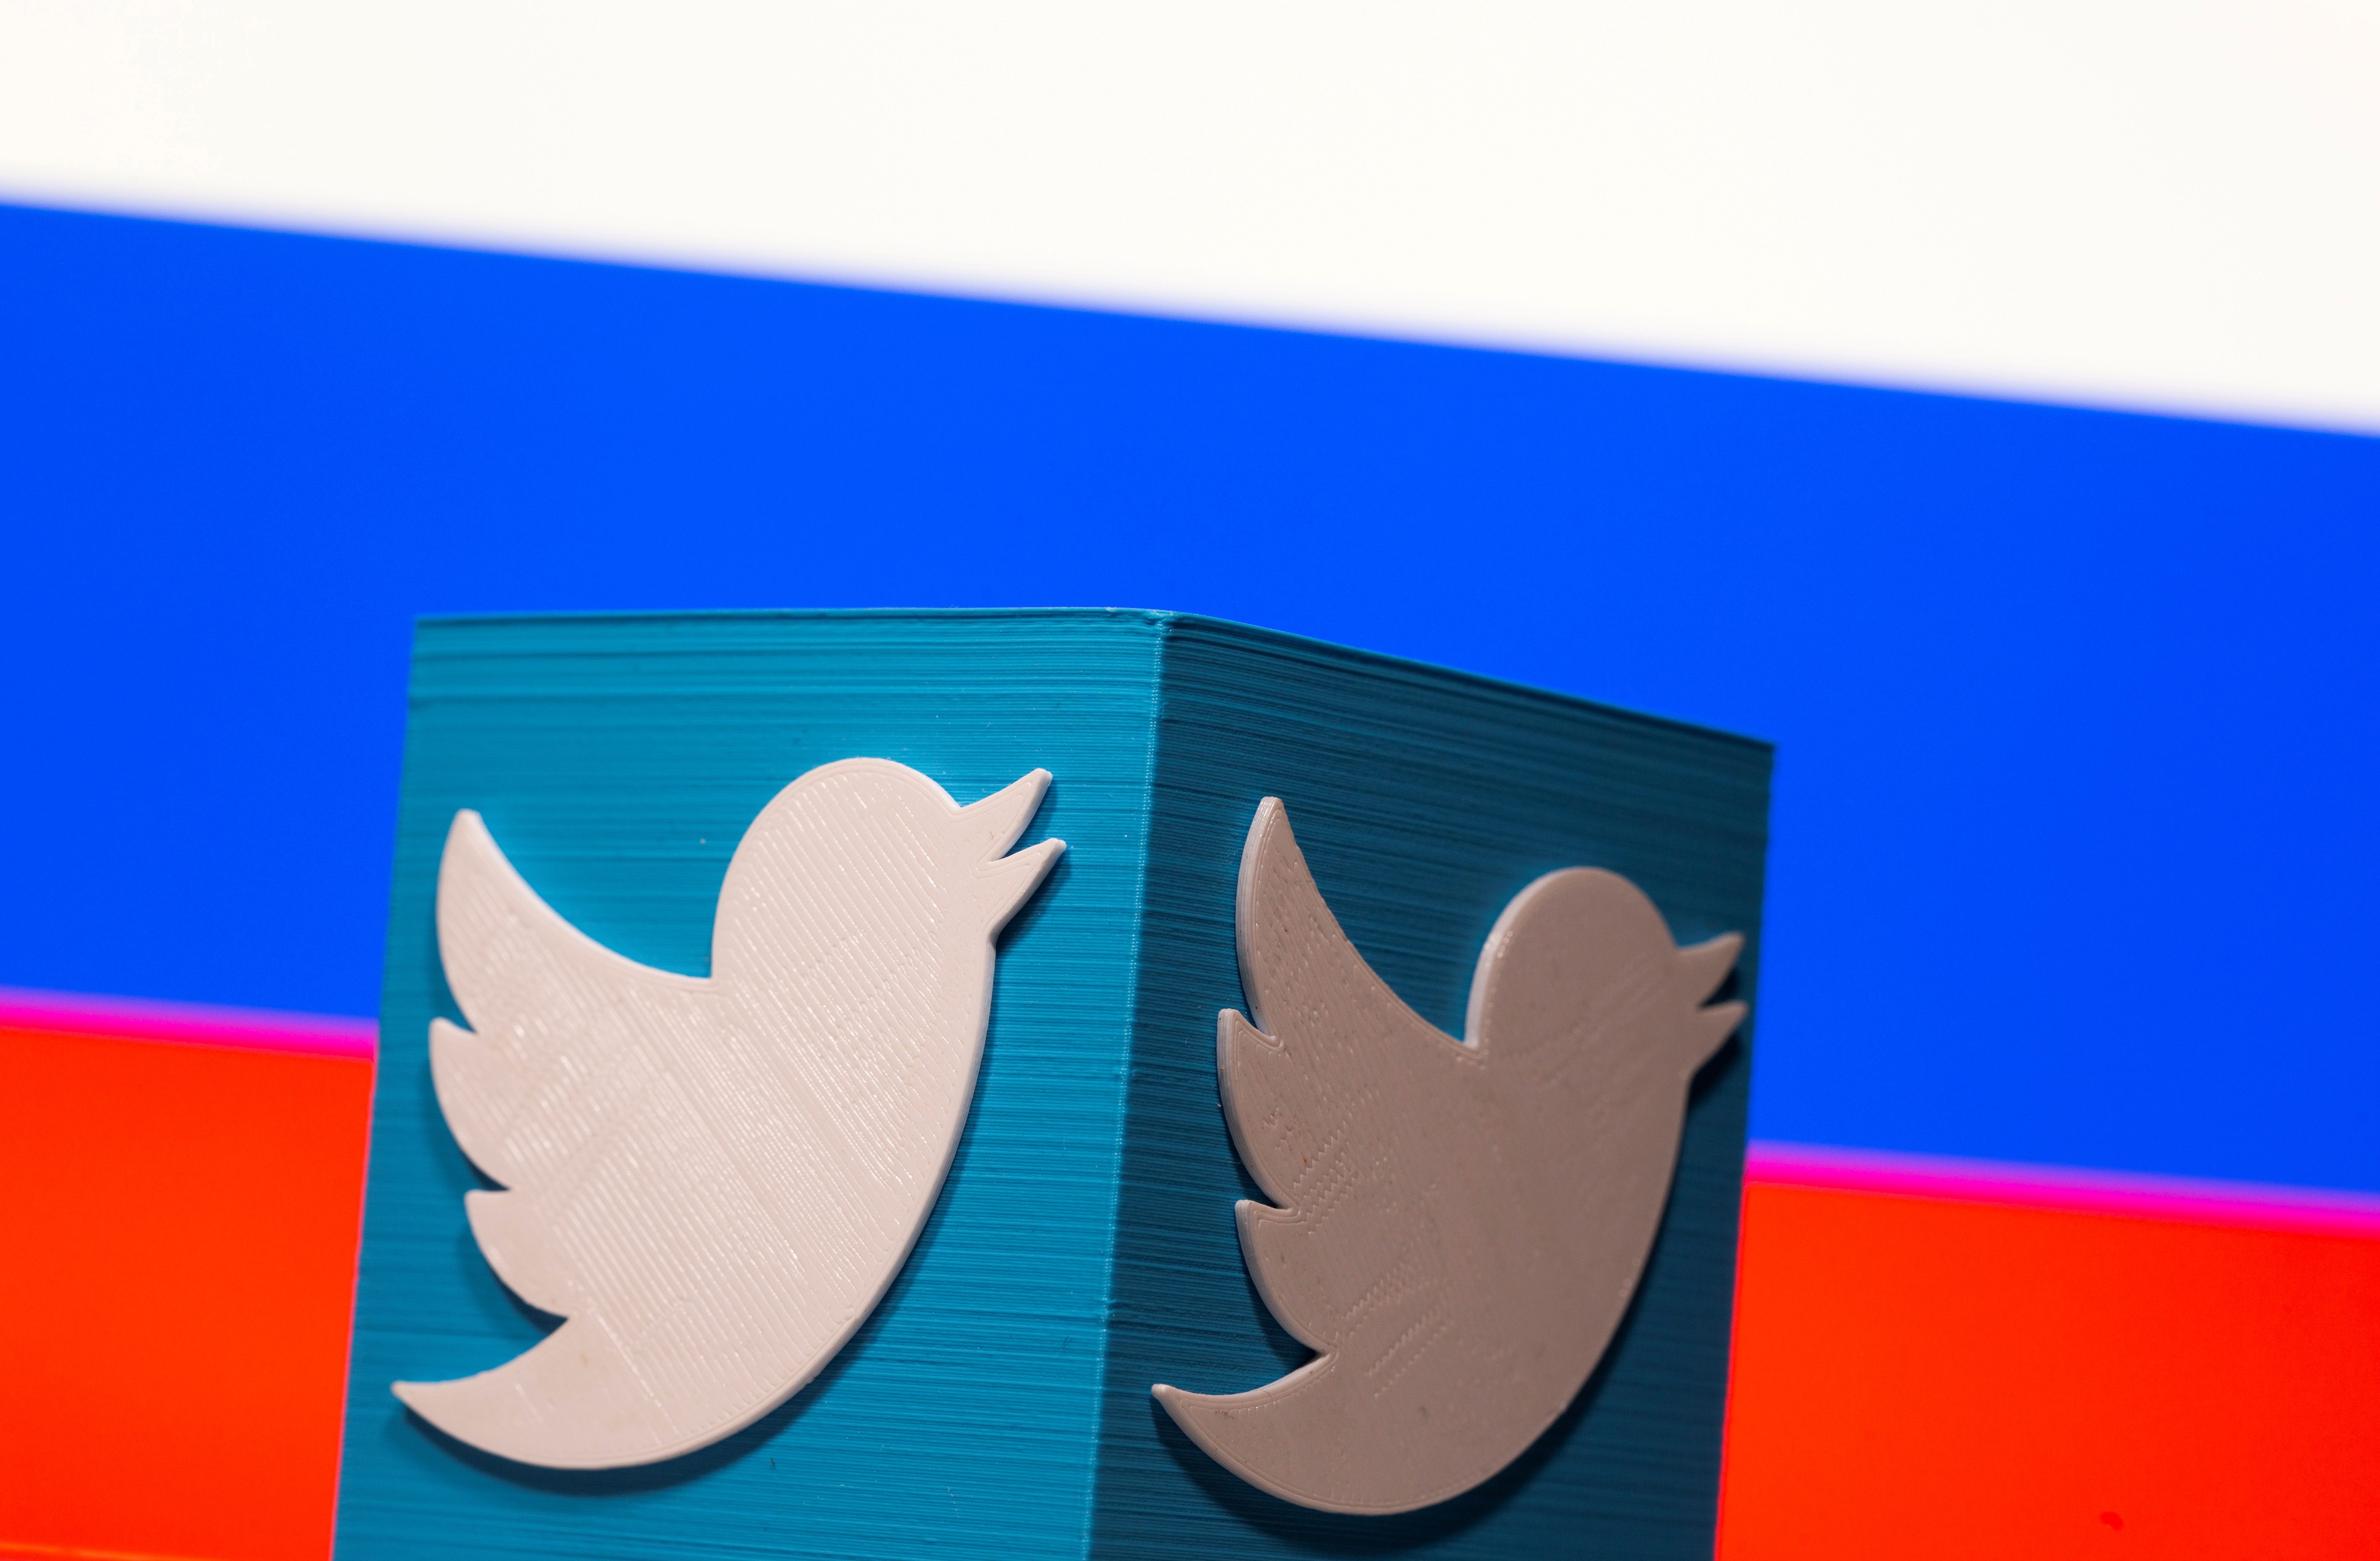 Russia seeks extra fines against Twitter over ‘banned content’ – TASS